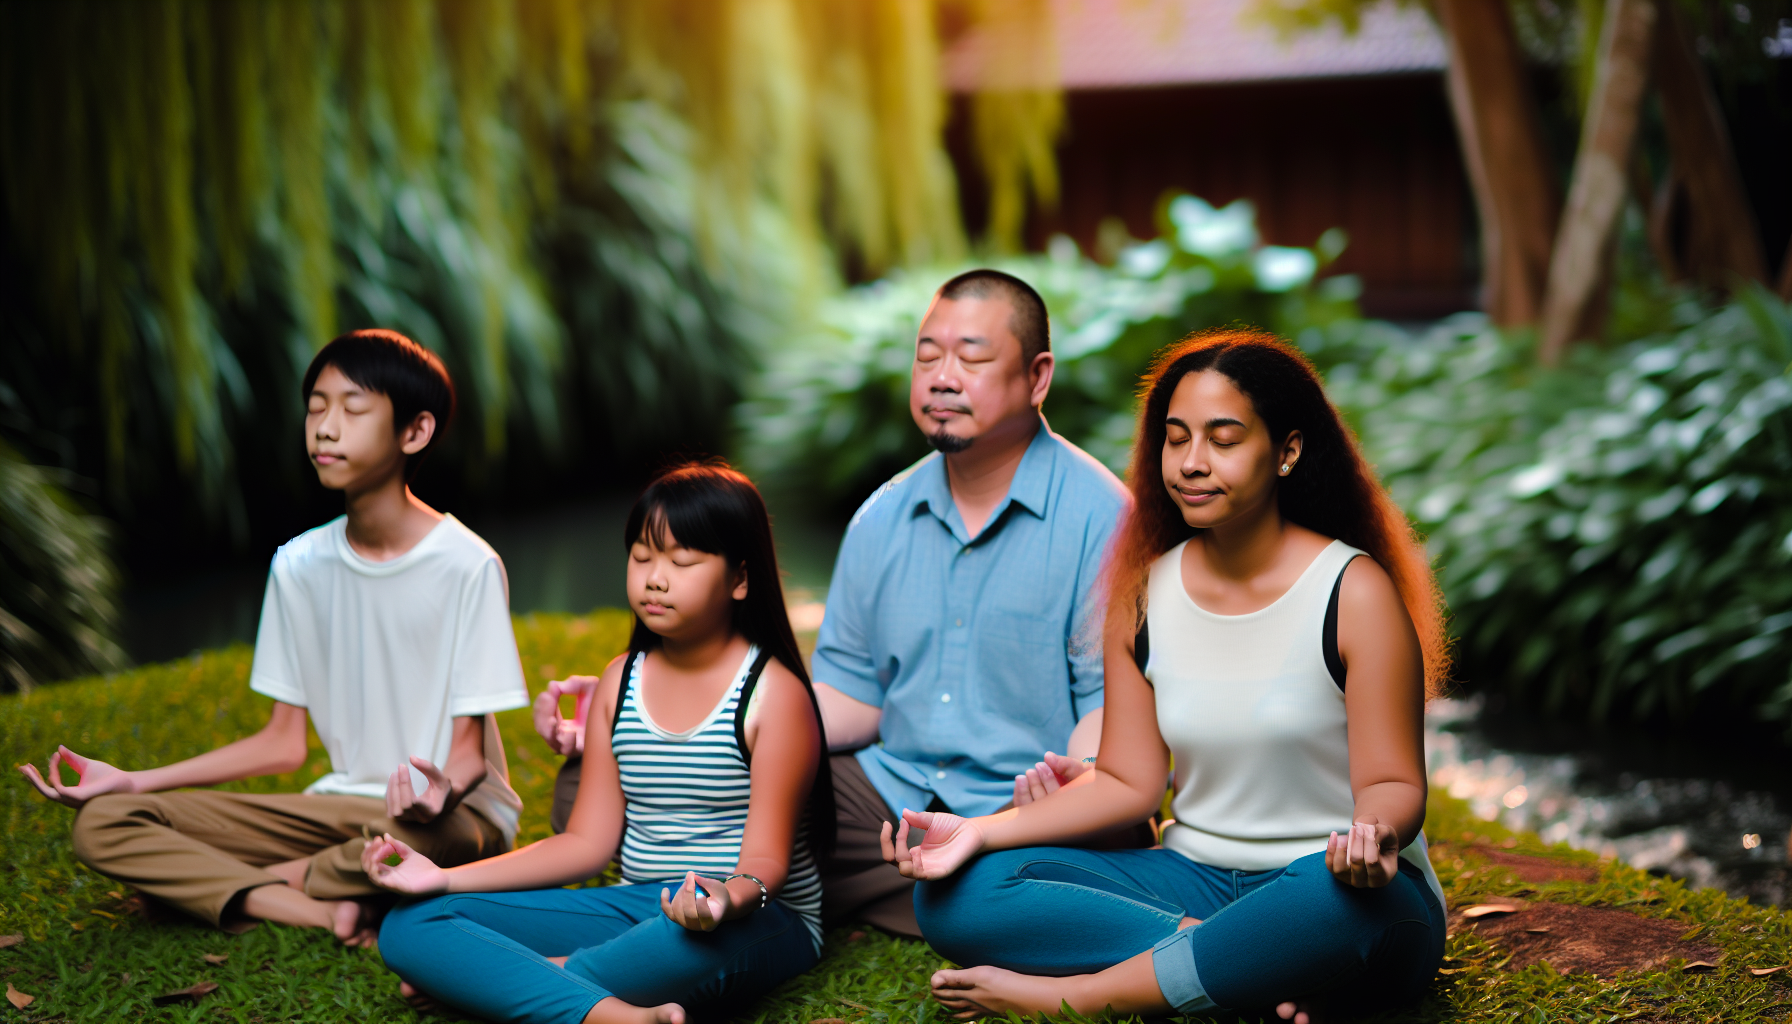 Family practicing mindfulness together in a peaceful setting